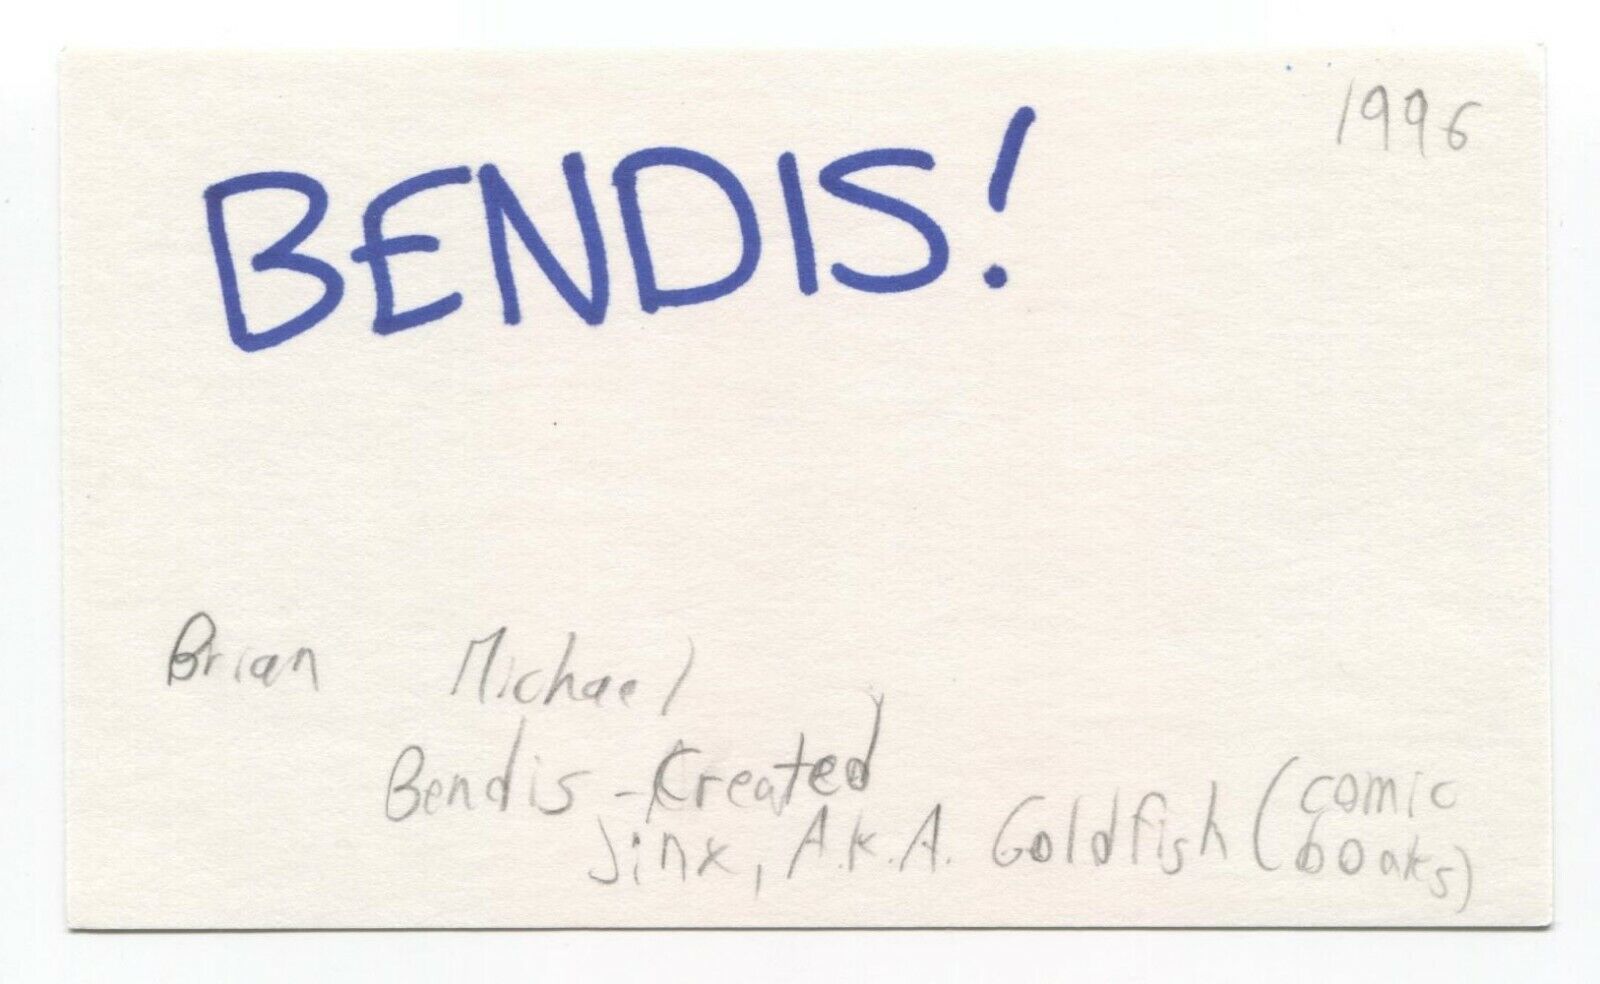 Brian Michael Bendis Signed 3x5 Index Card Autographed Comic Book Artist Marvel